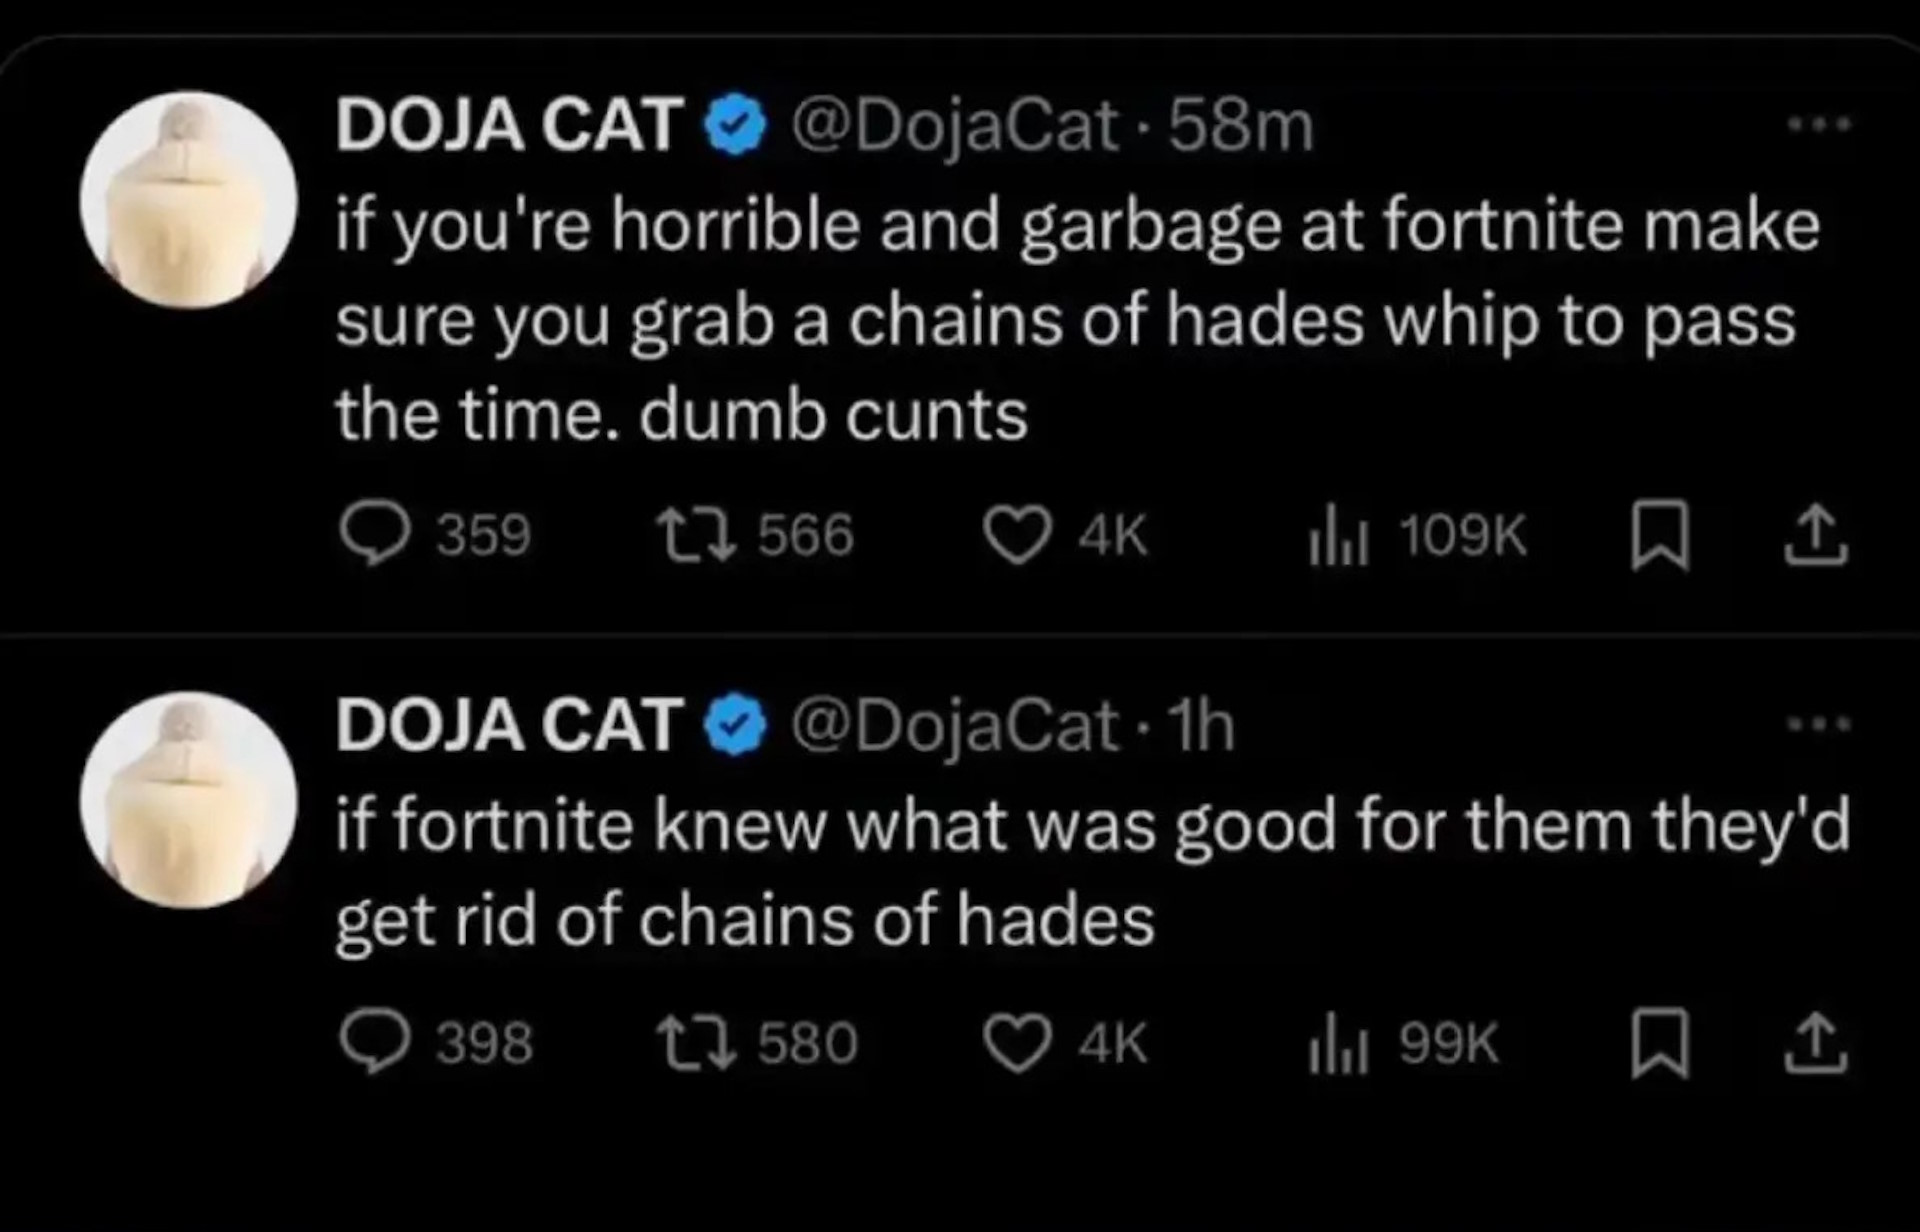 If you're horrible and trashy at Fortnite, be sure to grab a Hades Chain Whip to pass the time.  silly pussies.  If Fortnite knew what was good for them, they would free themselves from the chains of Hades